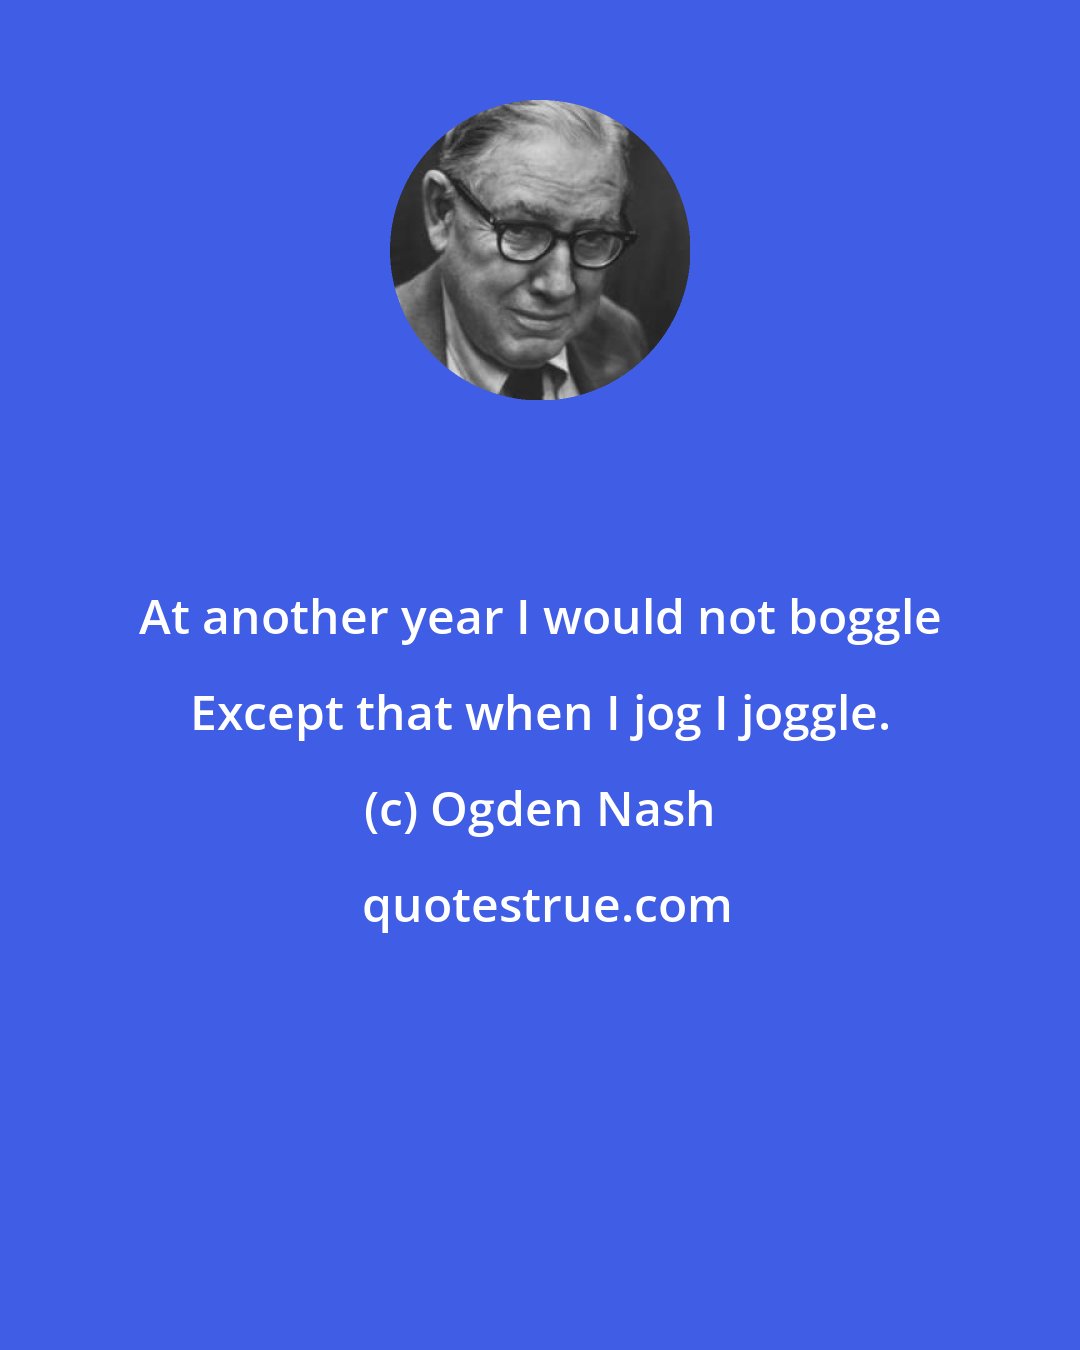 Ogden Nash: At another year I would not boggle Except that when I jog I joggle.